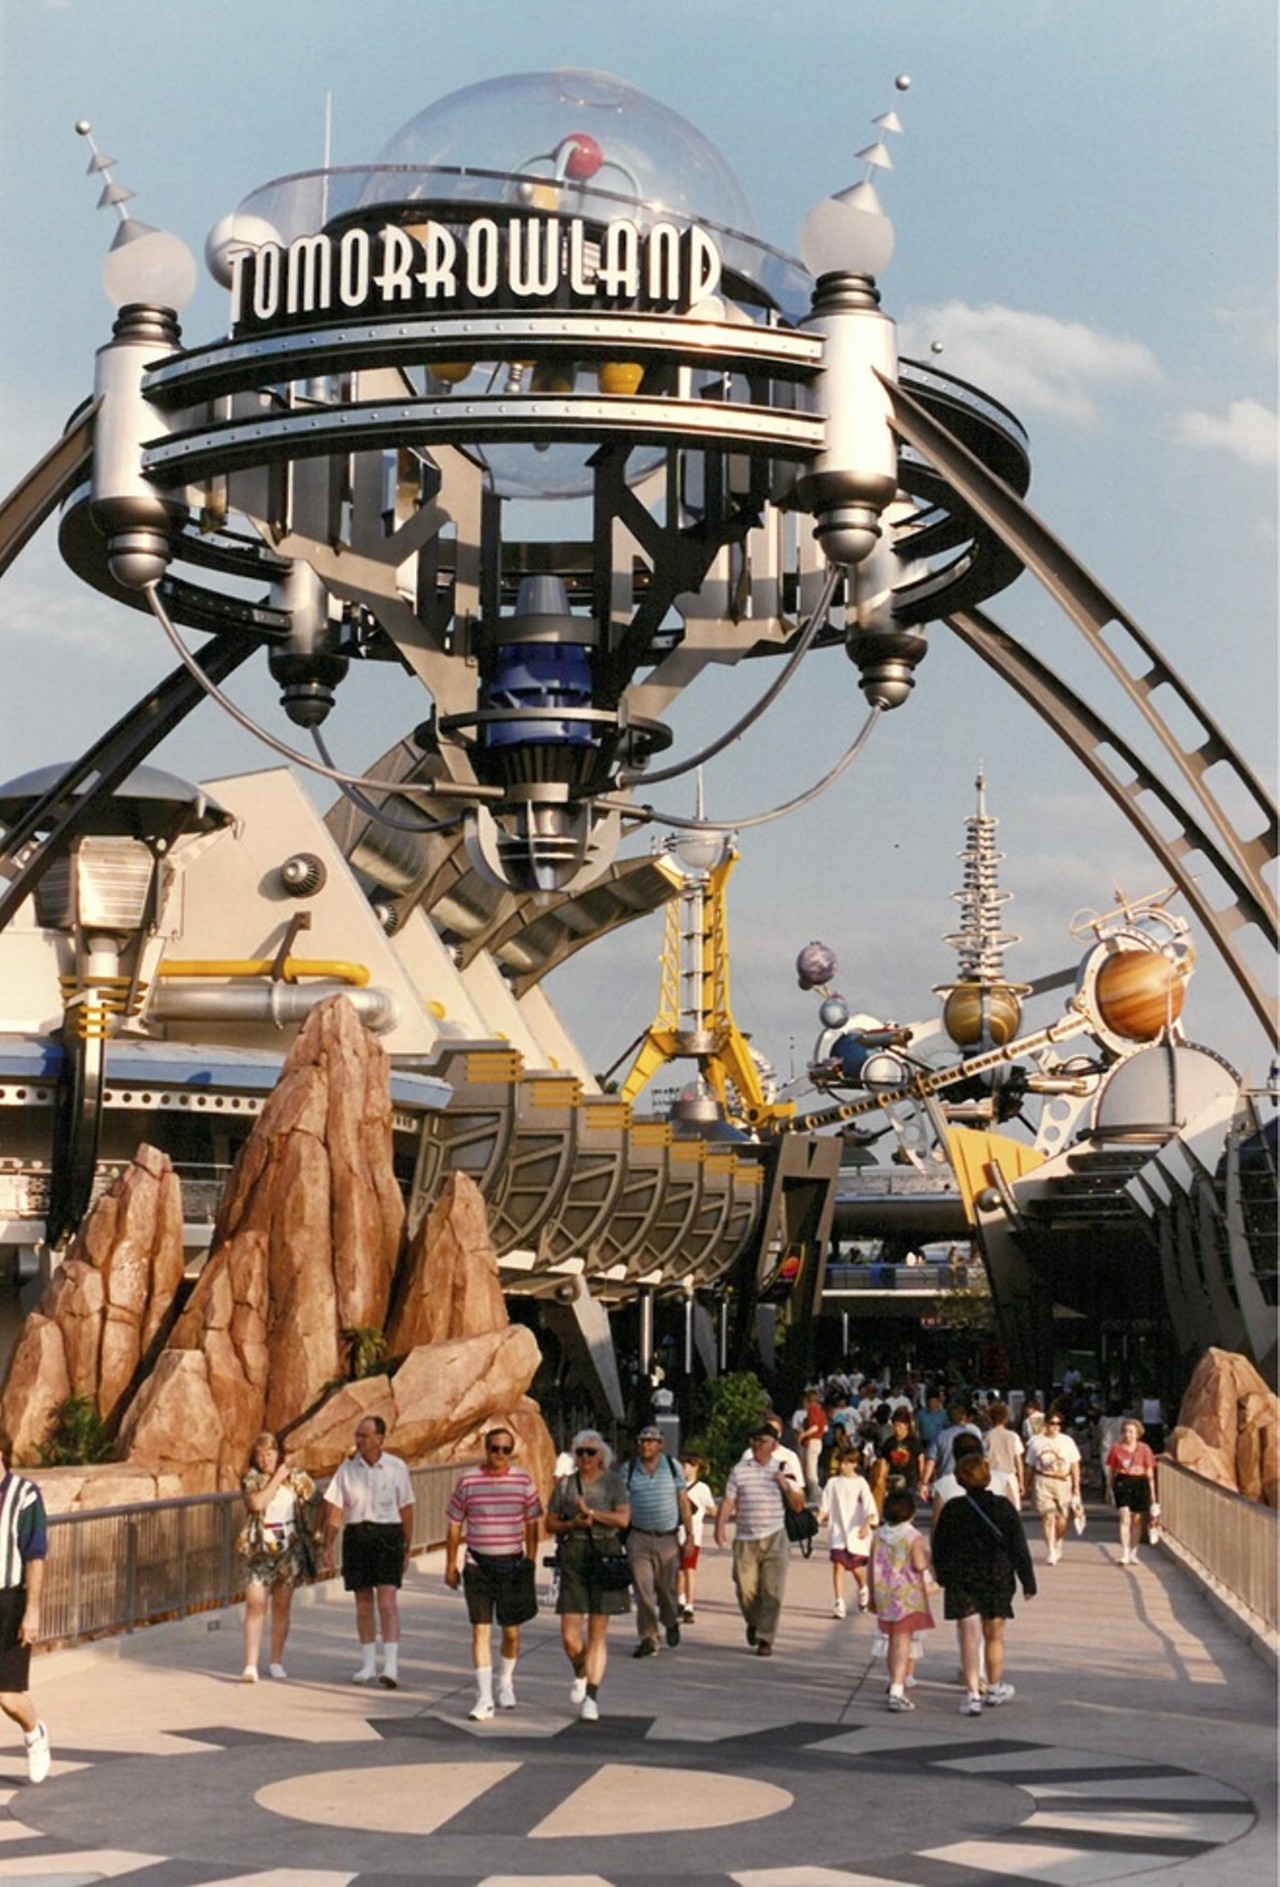 Back in the '90s, everything was cooler at Disney World